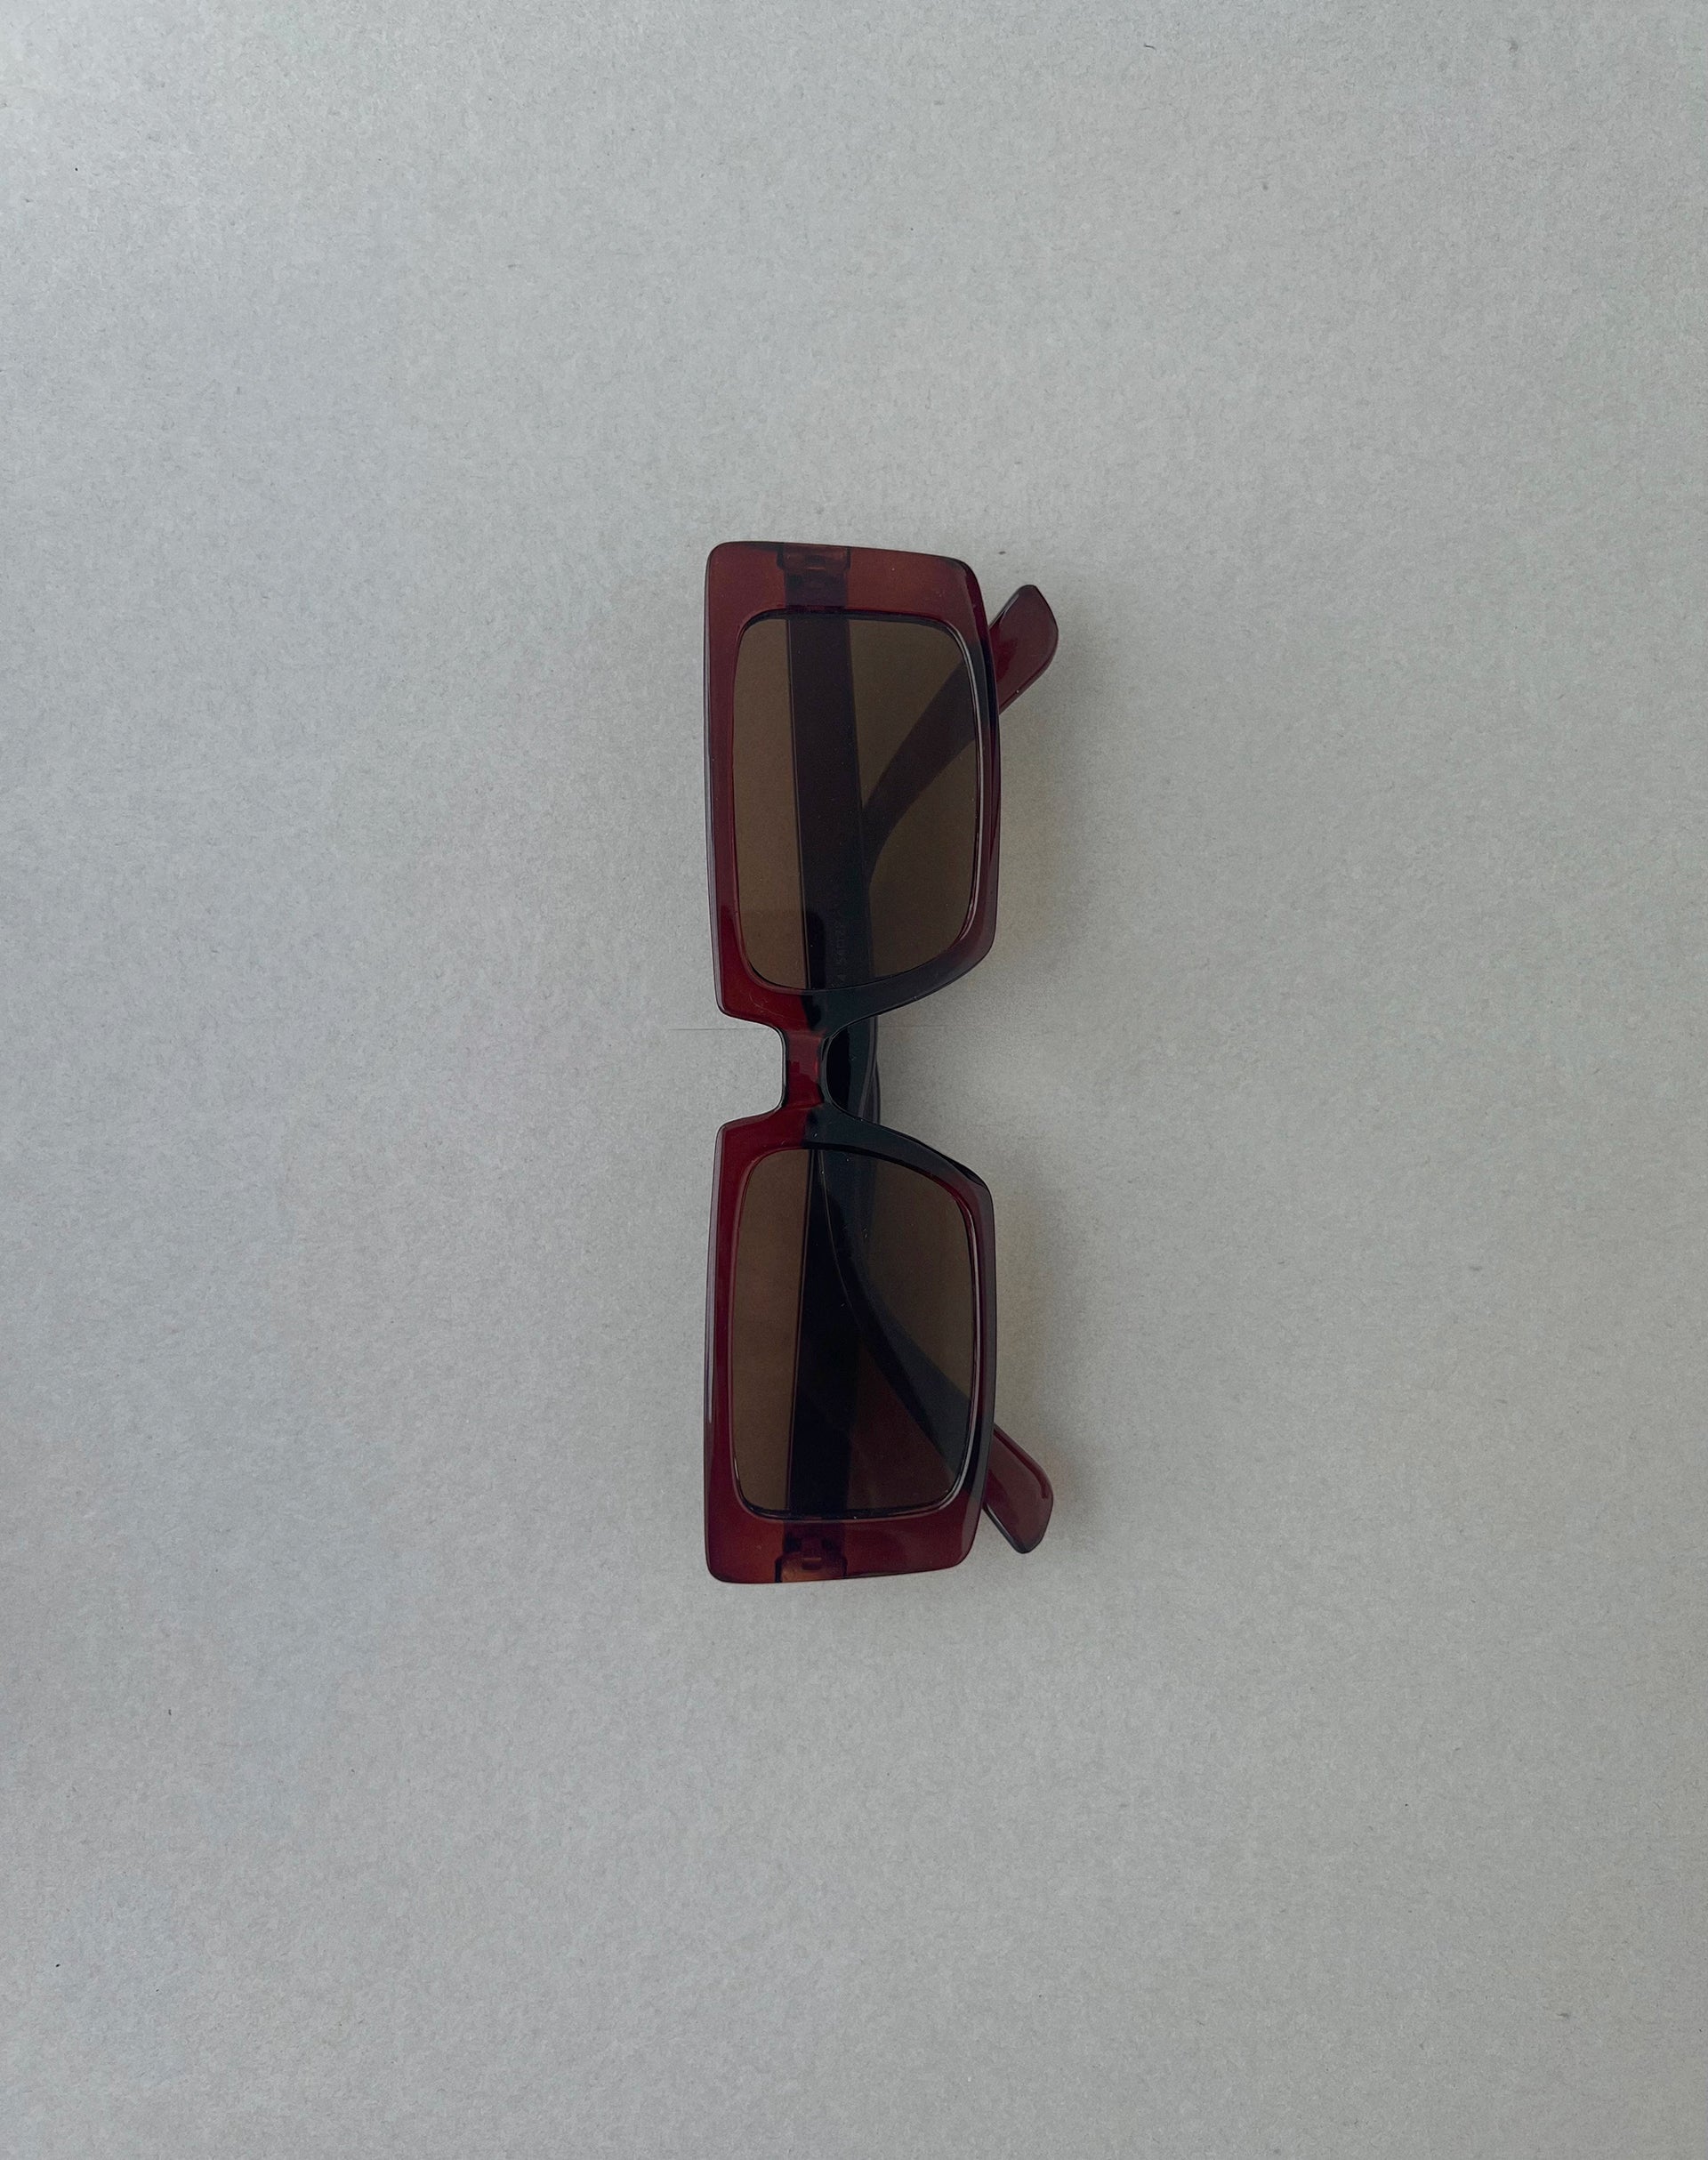 image of Lelia Rectangle Sunglasses in Brown